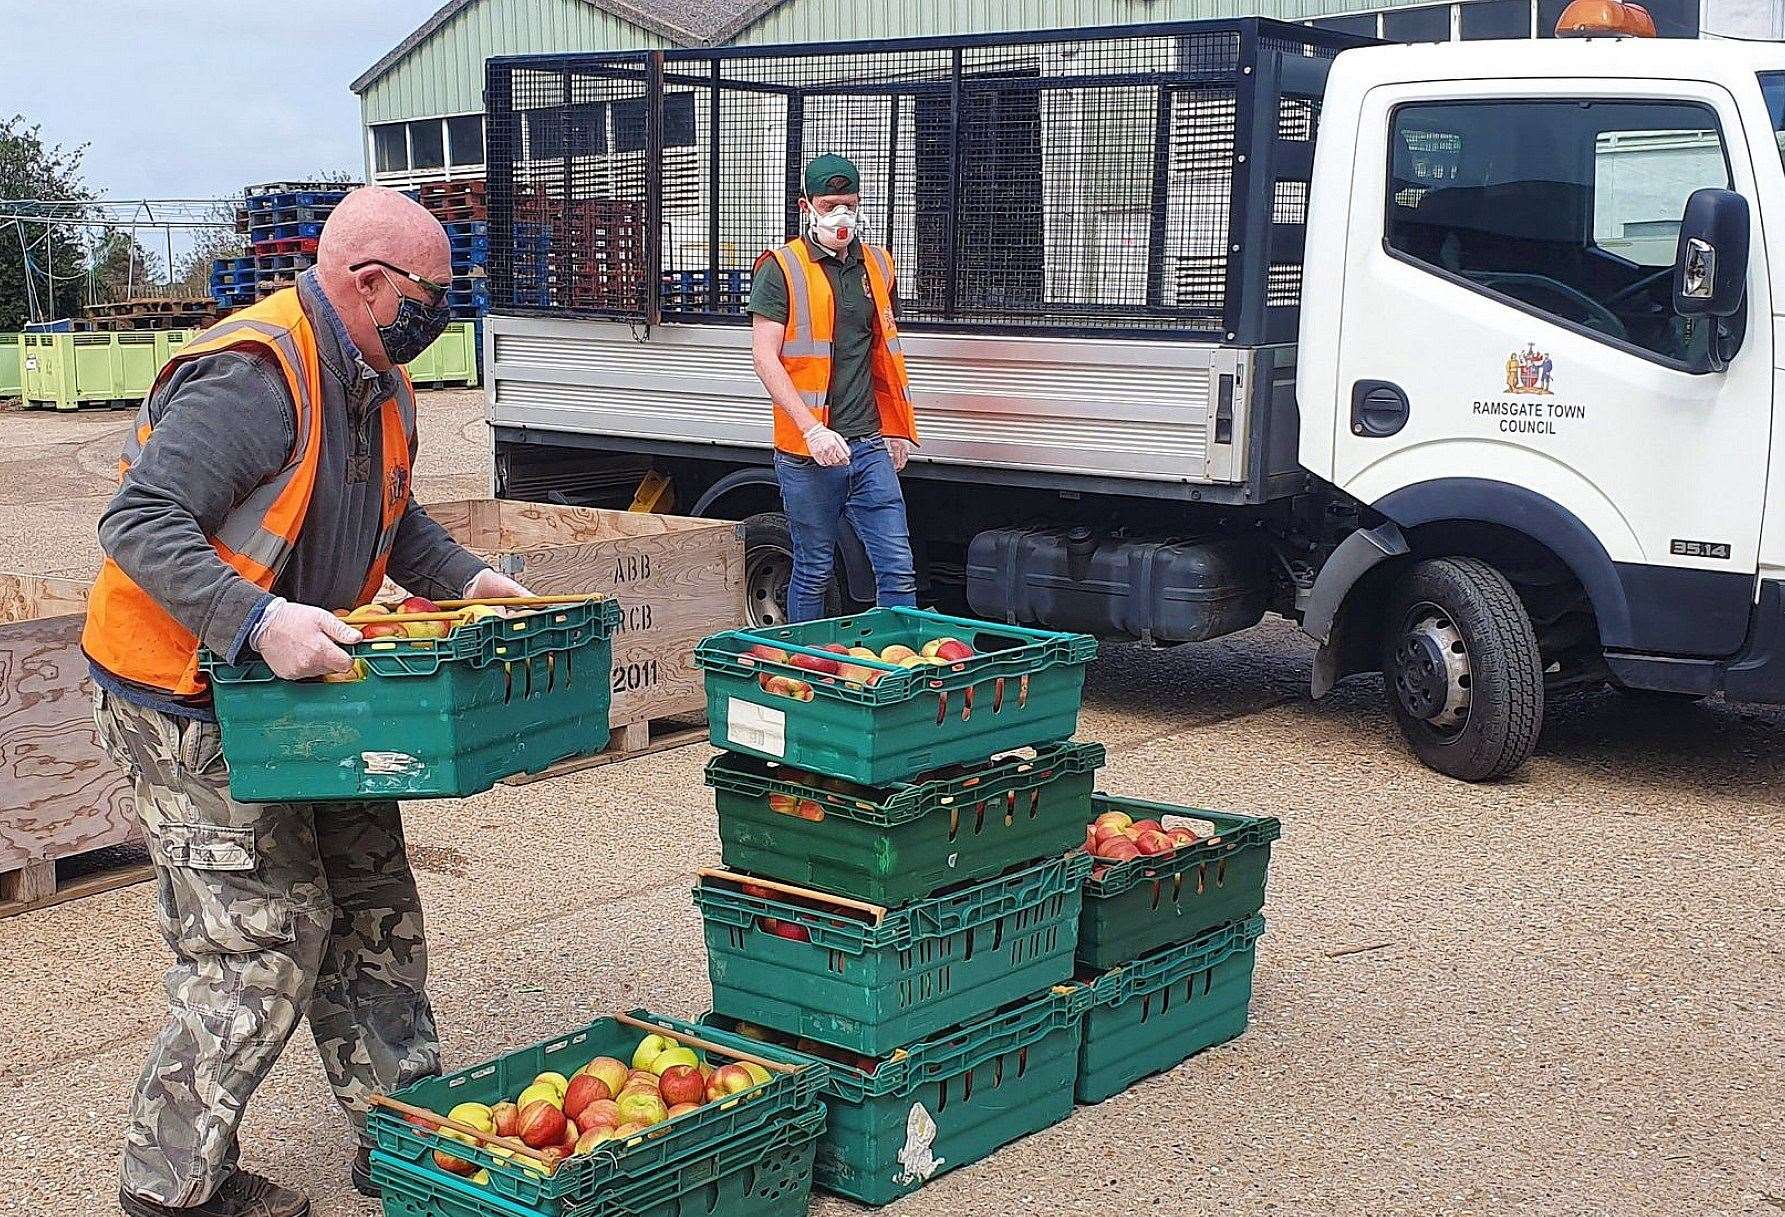 The volunteers are also working with Ramsgate town council team to deliver produce